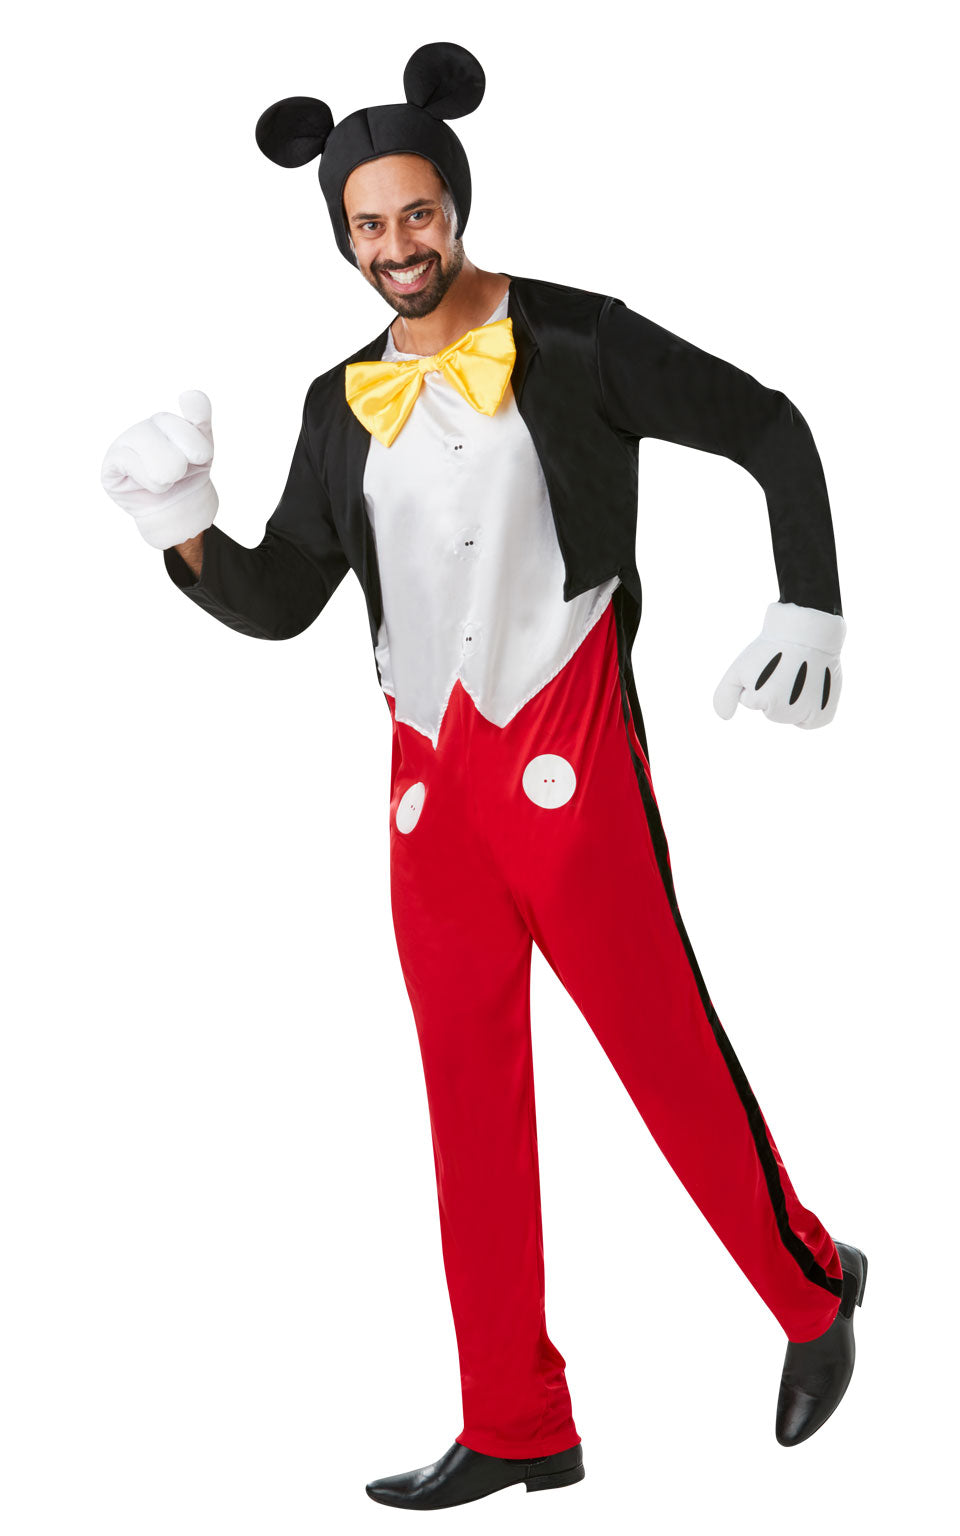 Disney Mickey Mouse Costume includes all in one jumpsuit with digitally printed buttons, black stripes down the legs, sewn in vest and attached mock jacket. Jumpsuit features attached satin bow tie. Velcro closures at rear. Oversized fibre filled gloves with printed details and four fibre filled fingers. Headpiece is a foam backed fabric snood with attached iconic Mickey Mouse ears. This is an officially licensed Disney product.